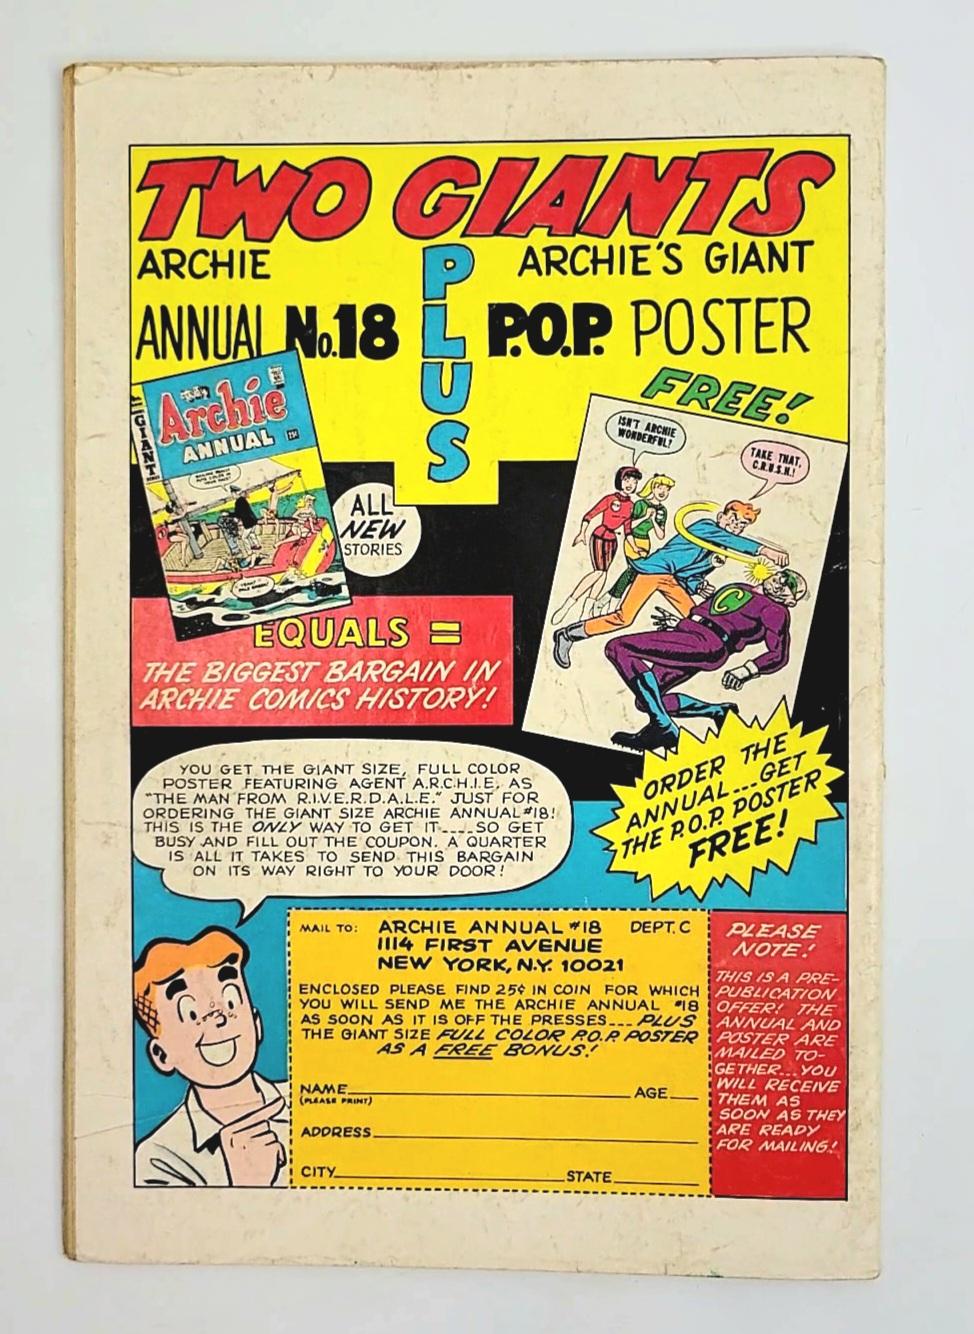 Vintage Comic Book Grouping